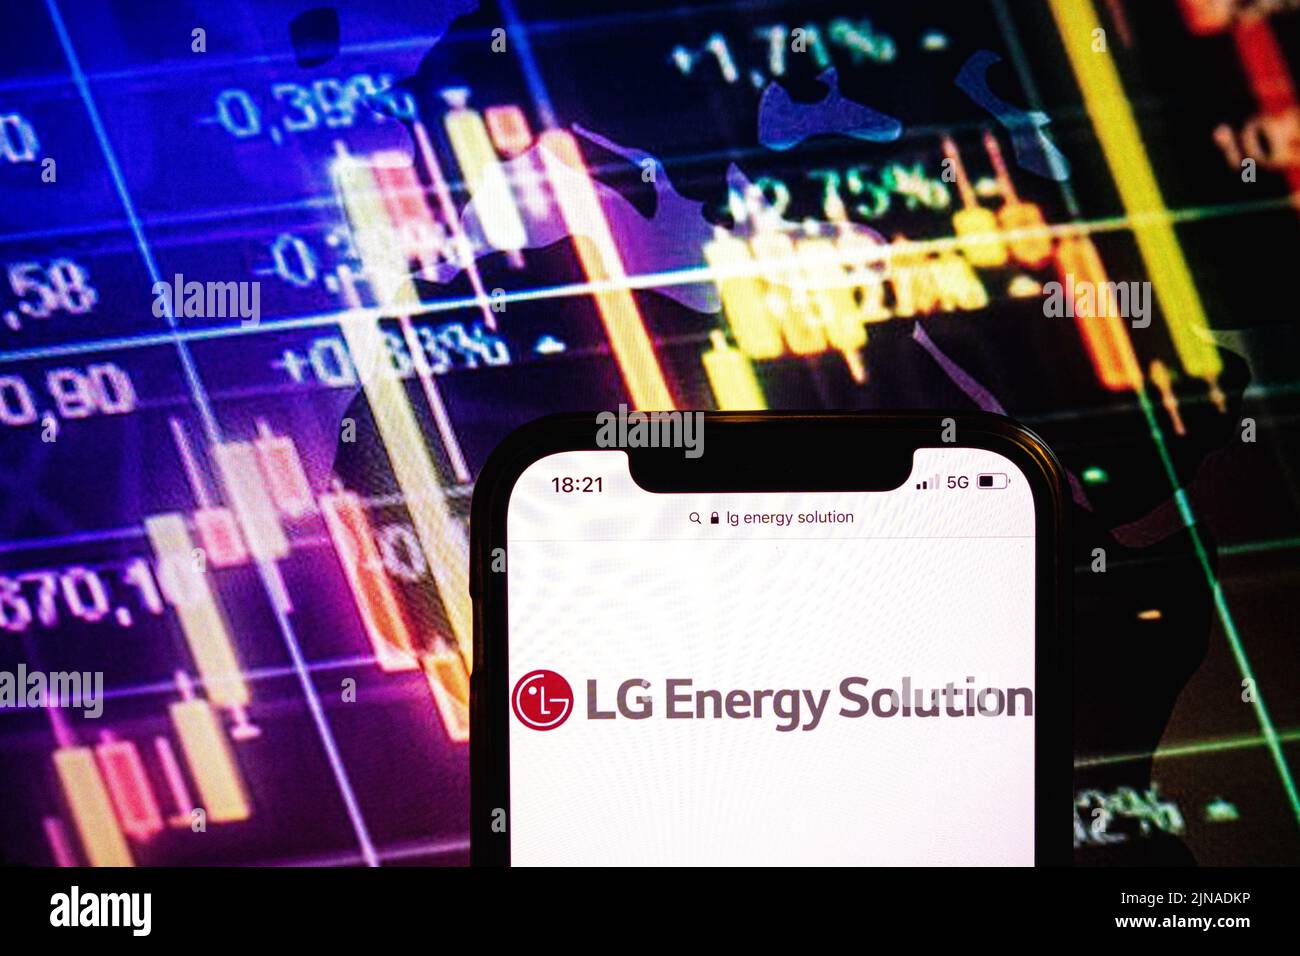 KONSKIE, POLAND - August 09, 2022: Smartphone displaying logo of LG Energy Solution company on stock exchange diagram background Stock Photo